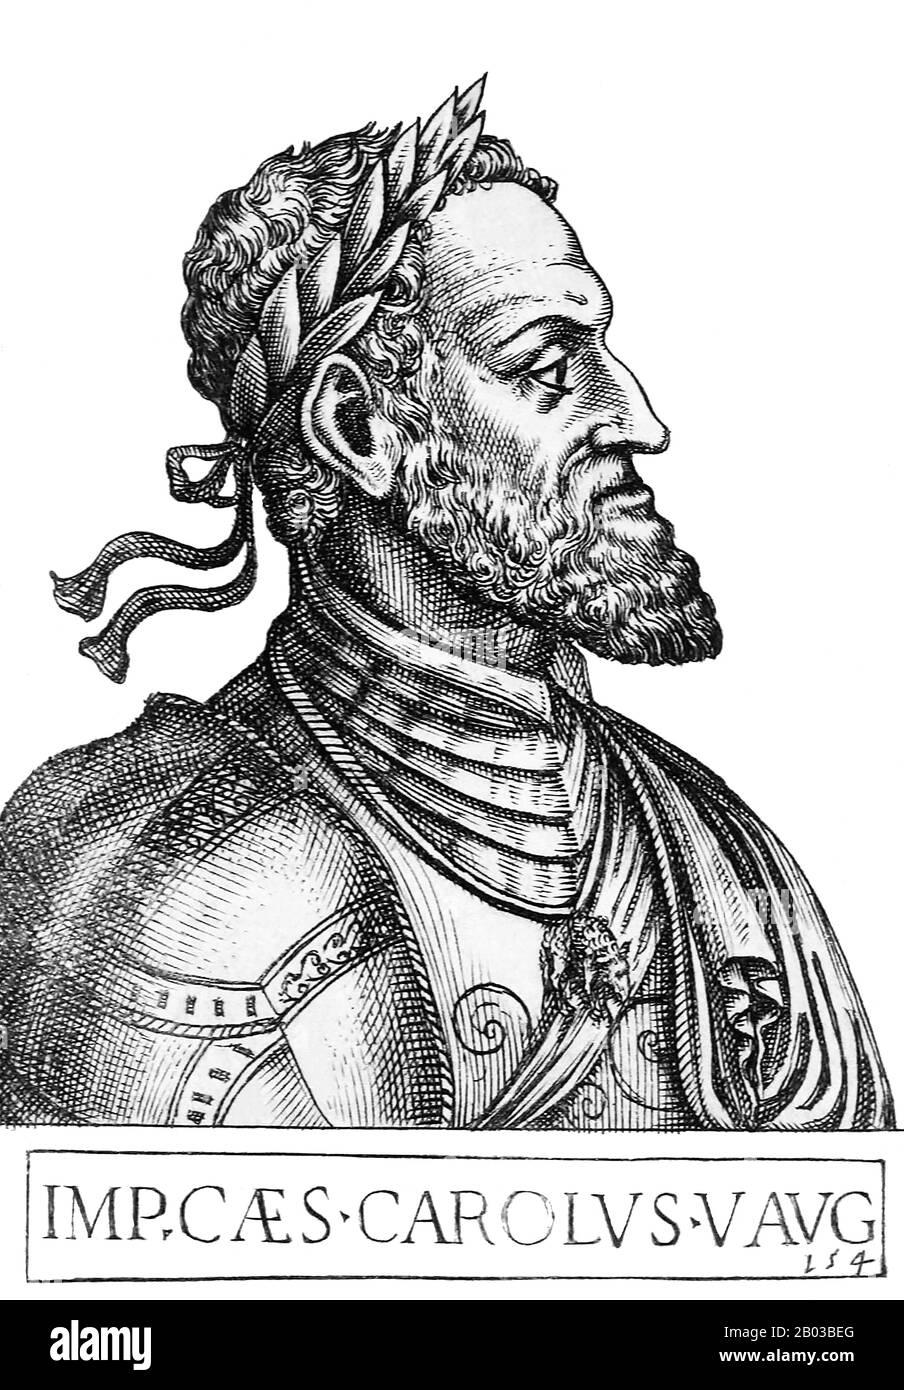 Charles V (24 February 1500 – 21 September 1558) was ruler of both the Holy Roman Empire from 1519 and the Spanish Empire (as Charles I of Spain) from 1516, as well as of the lands of the former Duchy of Burgundy from 1506. He stepped down from these and other positions by a series of abdications between 1554 and 1556. Stock Photo